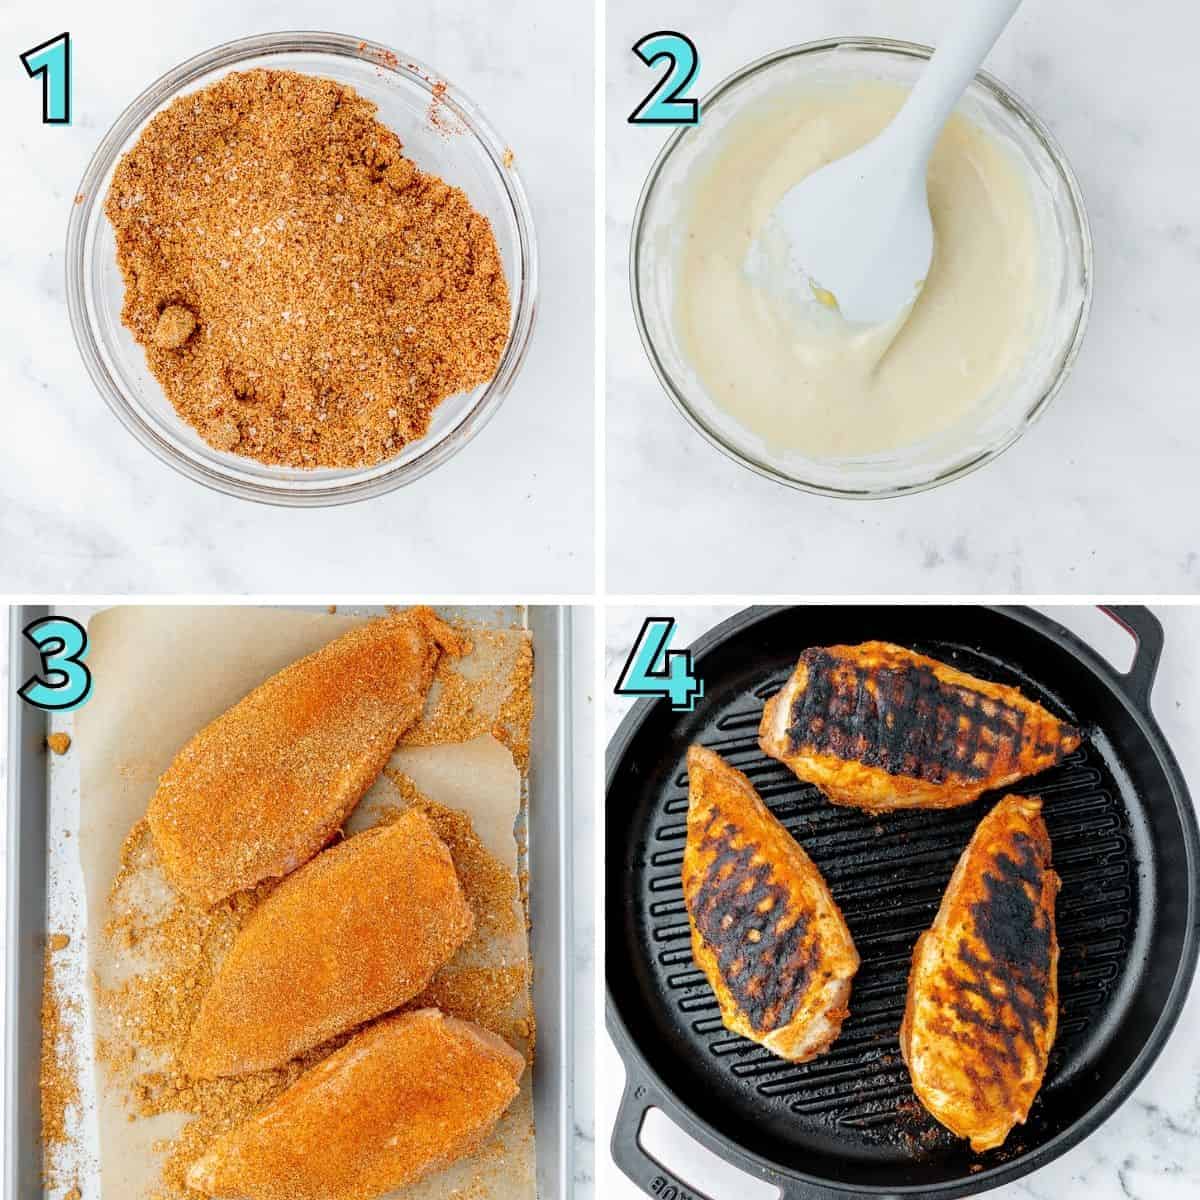 Step by step instructions to prepare alabama white sauce chicken, in a collage.